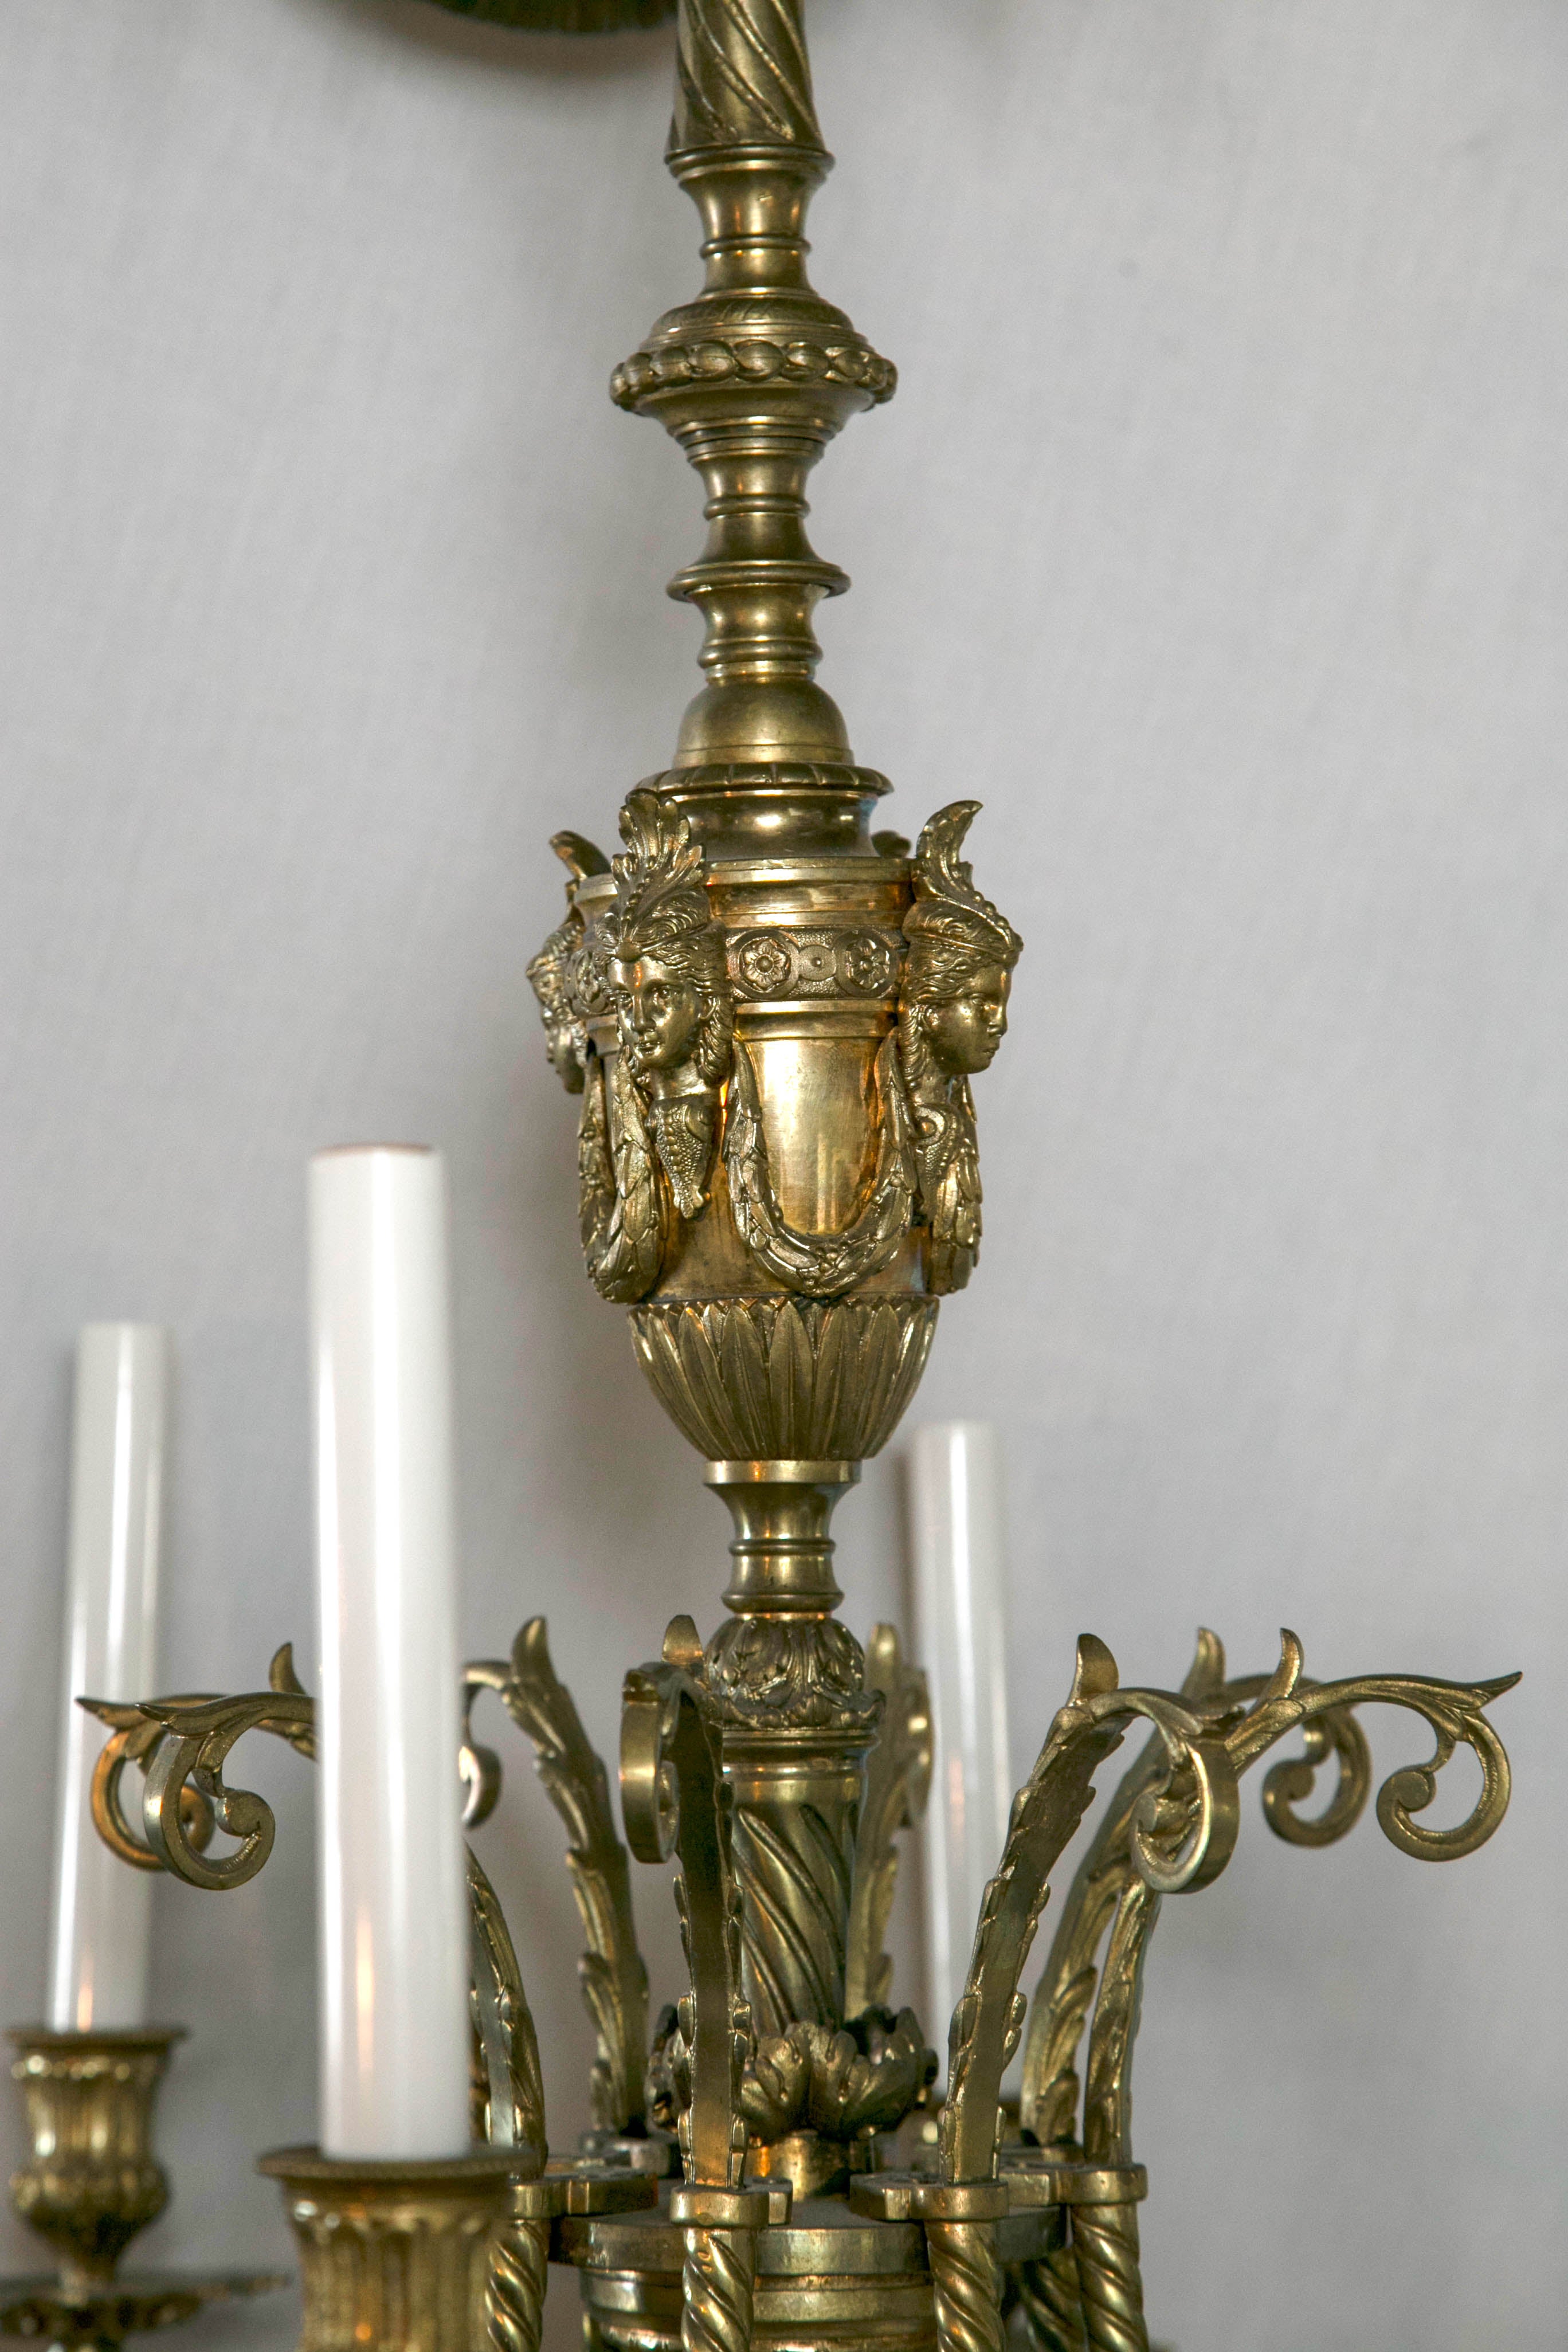 At the top is a typical  Louis  XVI style ribbon, below which is a  round  leaf and cluster form above the central column. Lady's  heads joined by swags above the  central part of the column to which are attached  8  arms decorated with leaves and